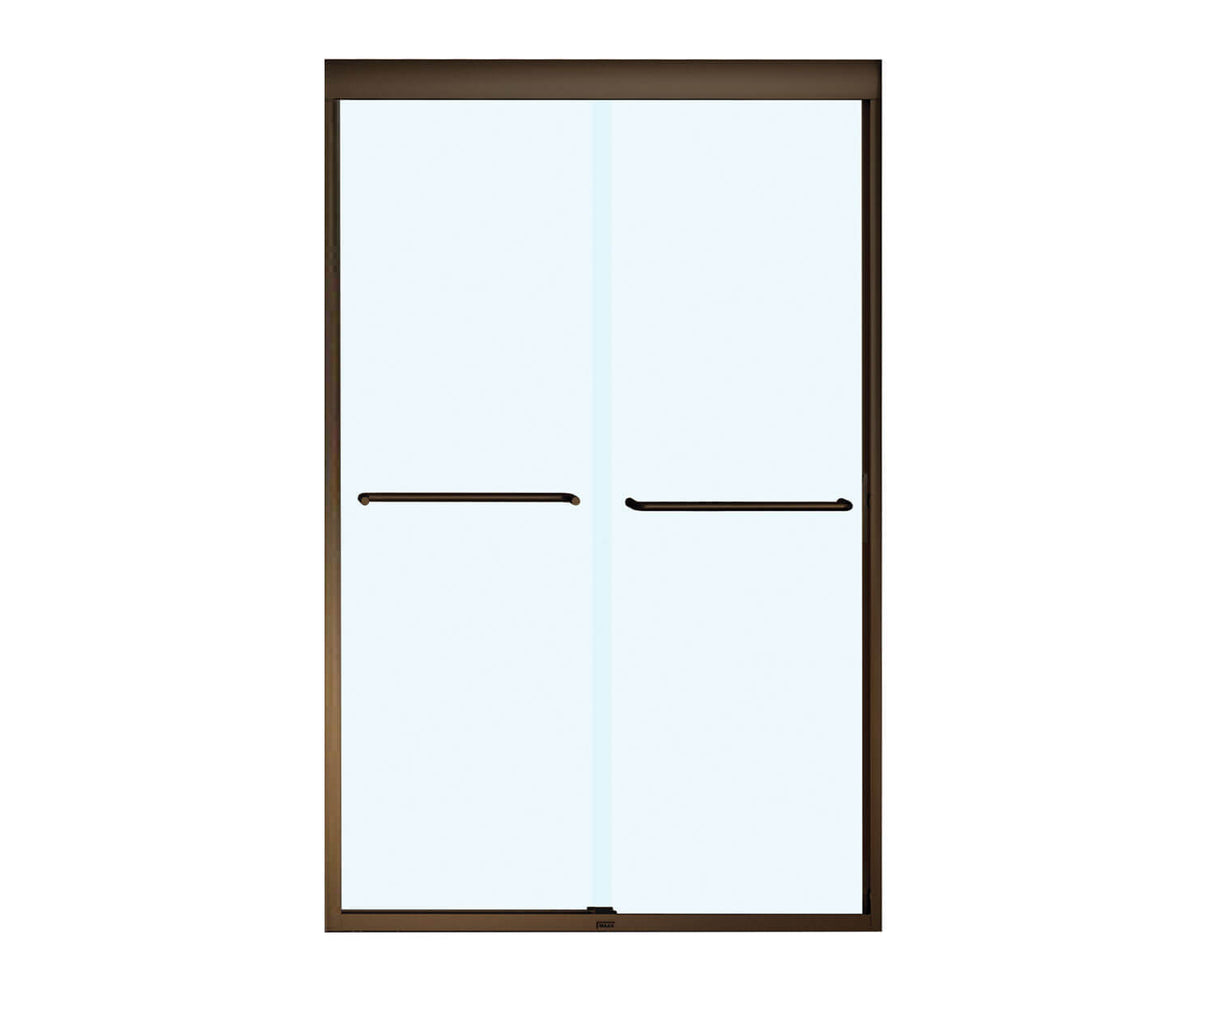 MAAX 135663-900-172-000 Aura 43-47 x 71 in. 6 mm Bypass Shower Door for Alcove Installation with Clear glass in Dark Bronze